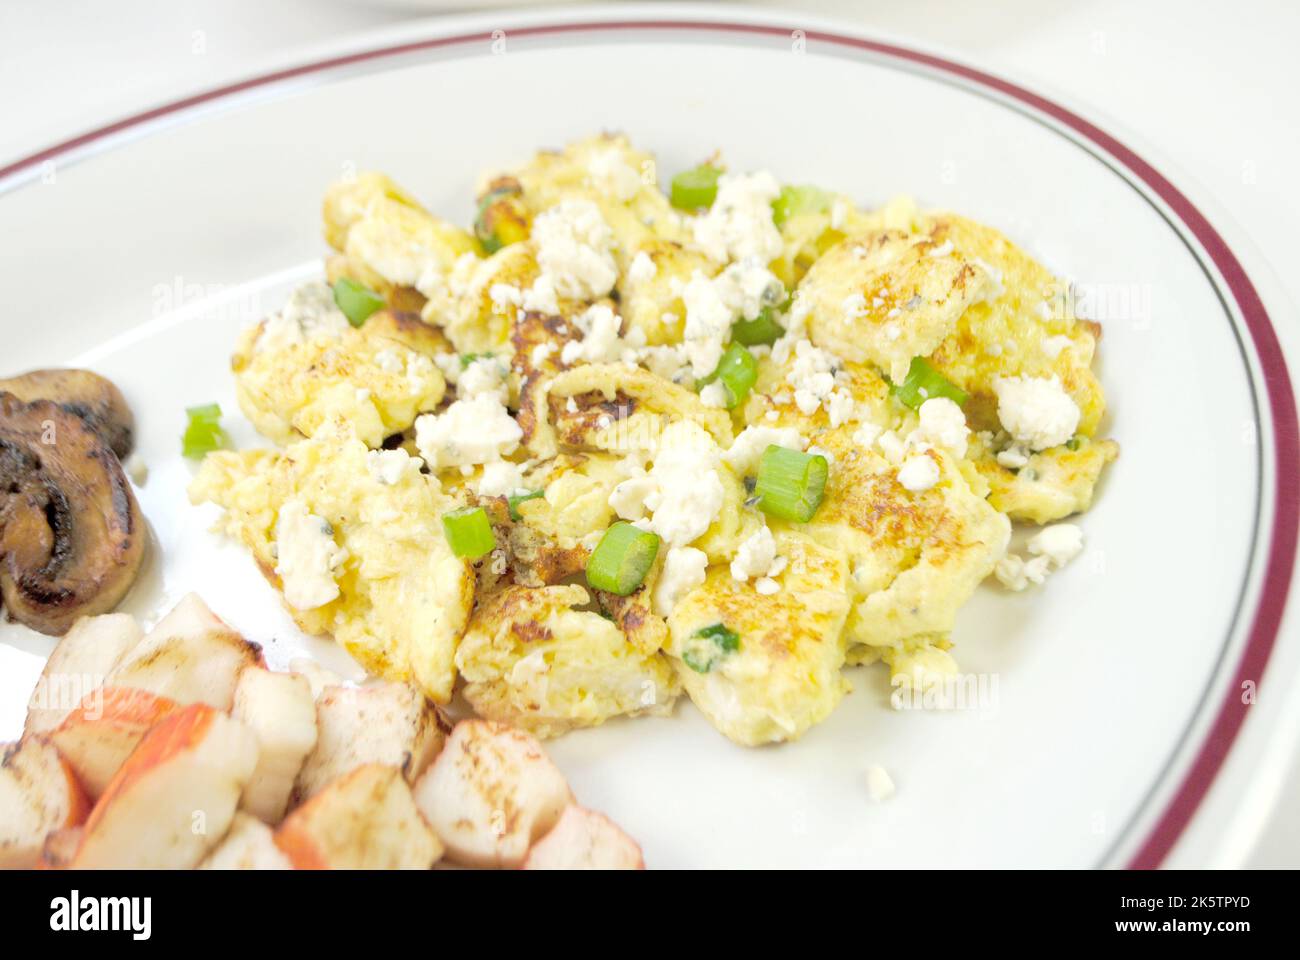 Scallion and Blue Cheese Scrambled Eggs with Side Dishes of Sauteed Mushrooms and Crab Meat Sticks Stock Photo